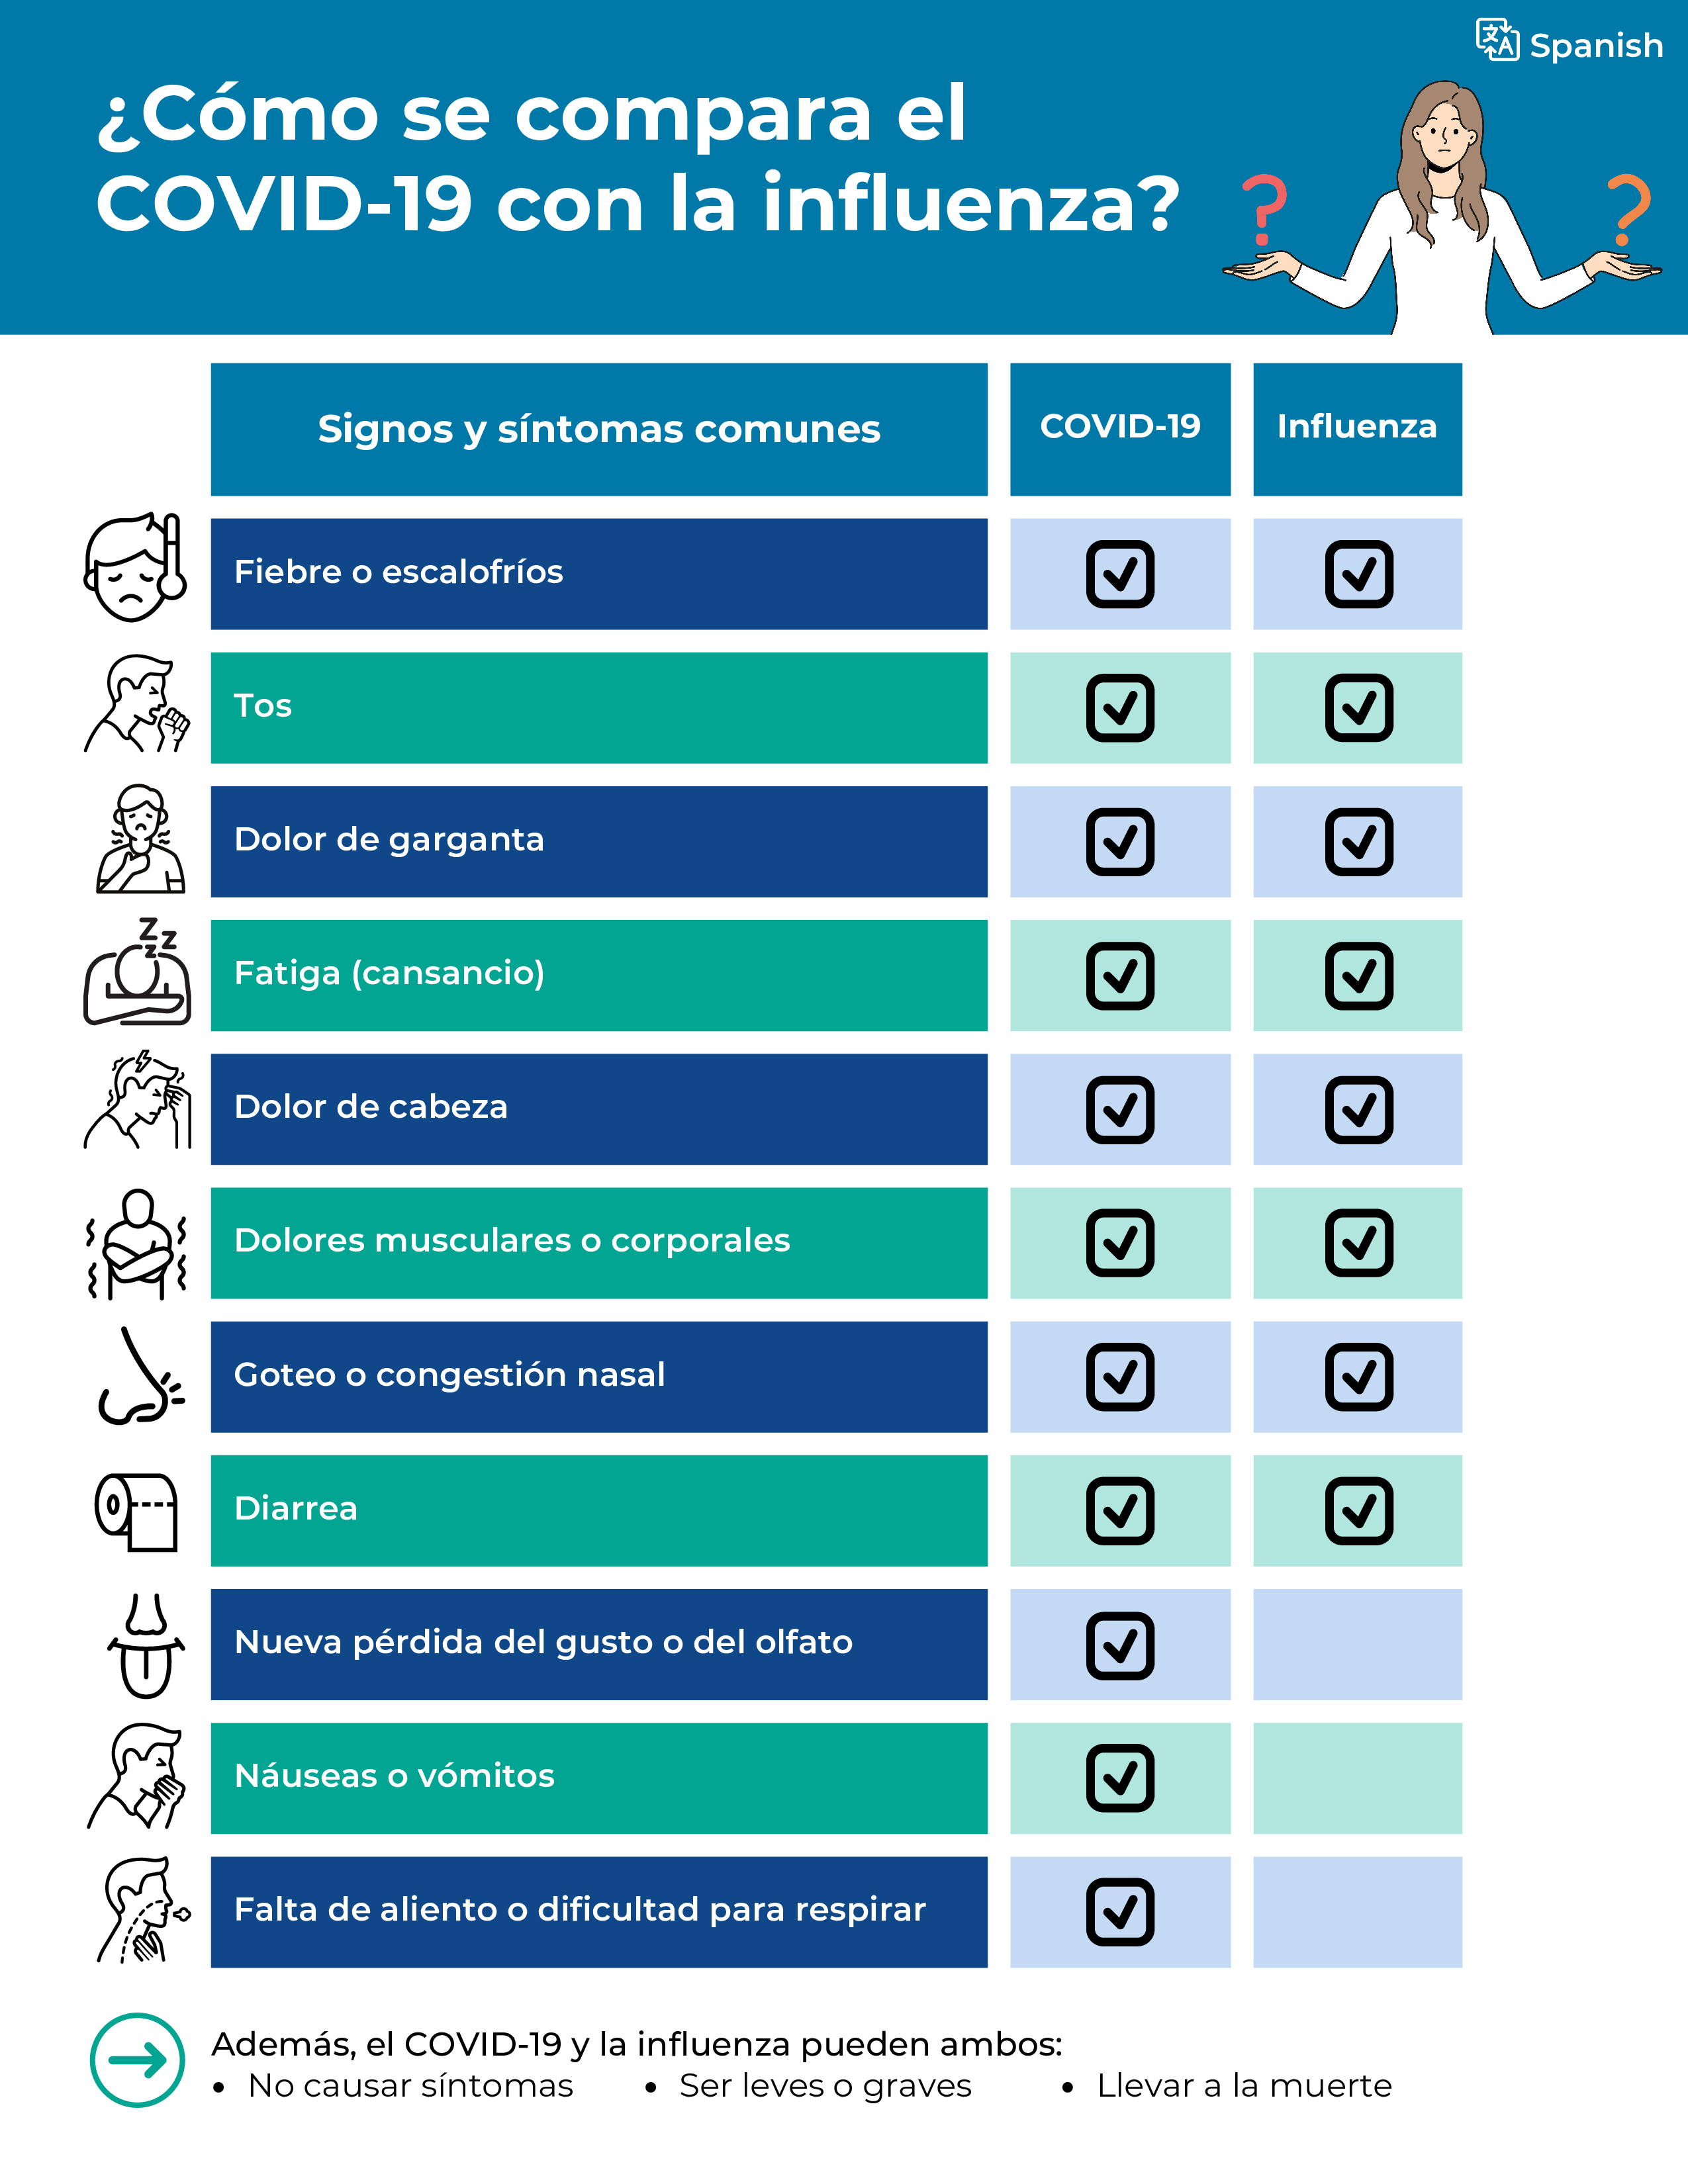 Checklist features various cartoon icons including a woman shrugging, and a person experiencing various symptoms such as coughing, fatigue, high temperature and other issues.